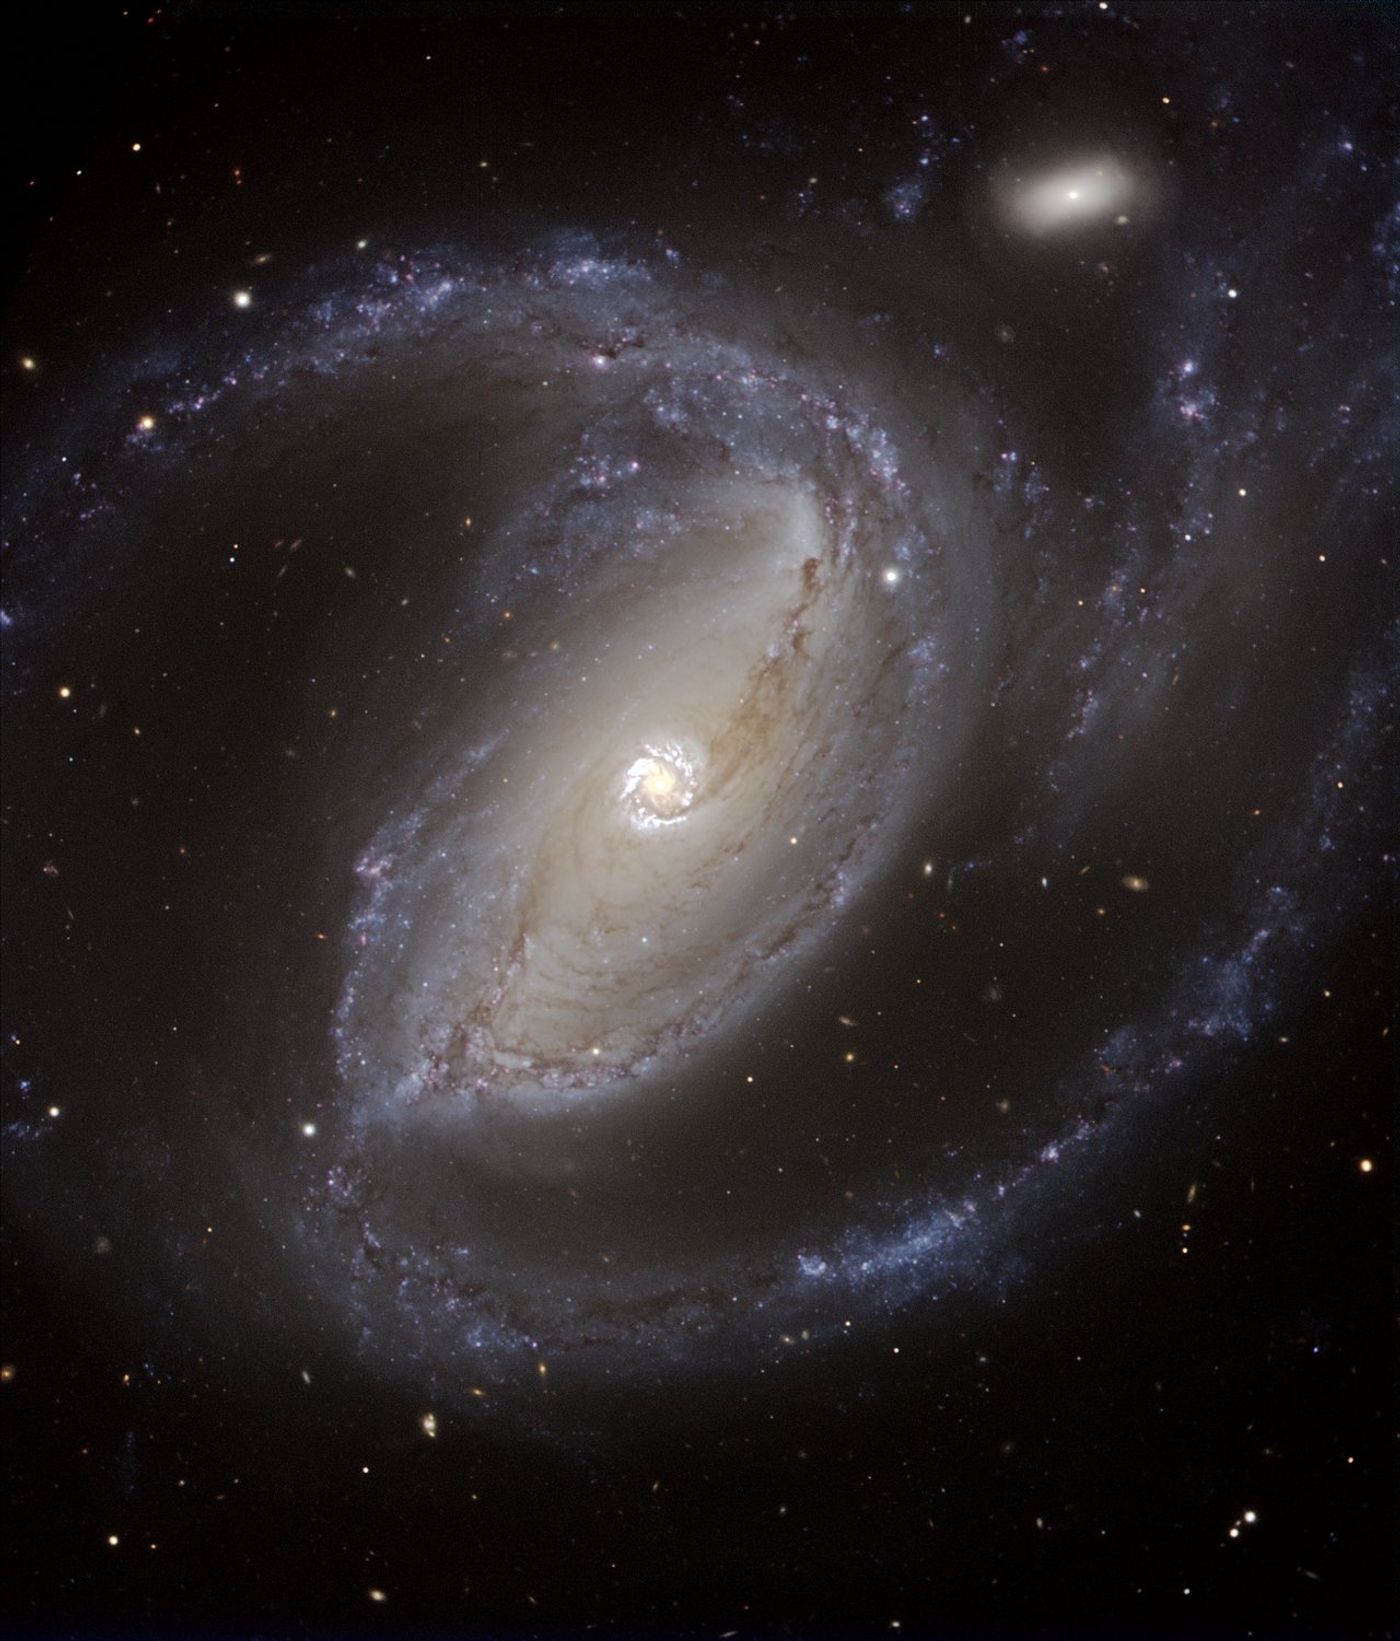 Spiral galaxy NGC 1097, a Seyfert galaxy like IZwicky1, the galaxy housing the supermassive black hole observed in the study.